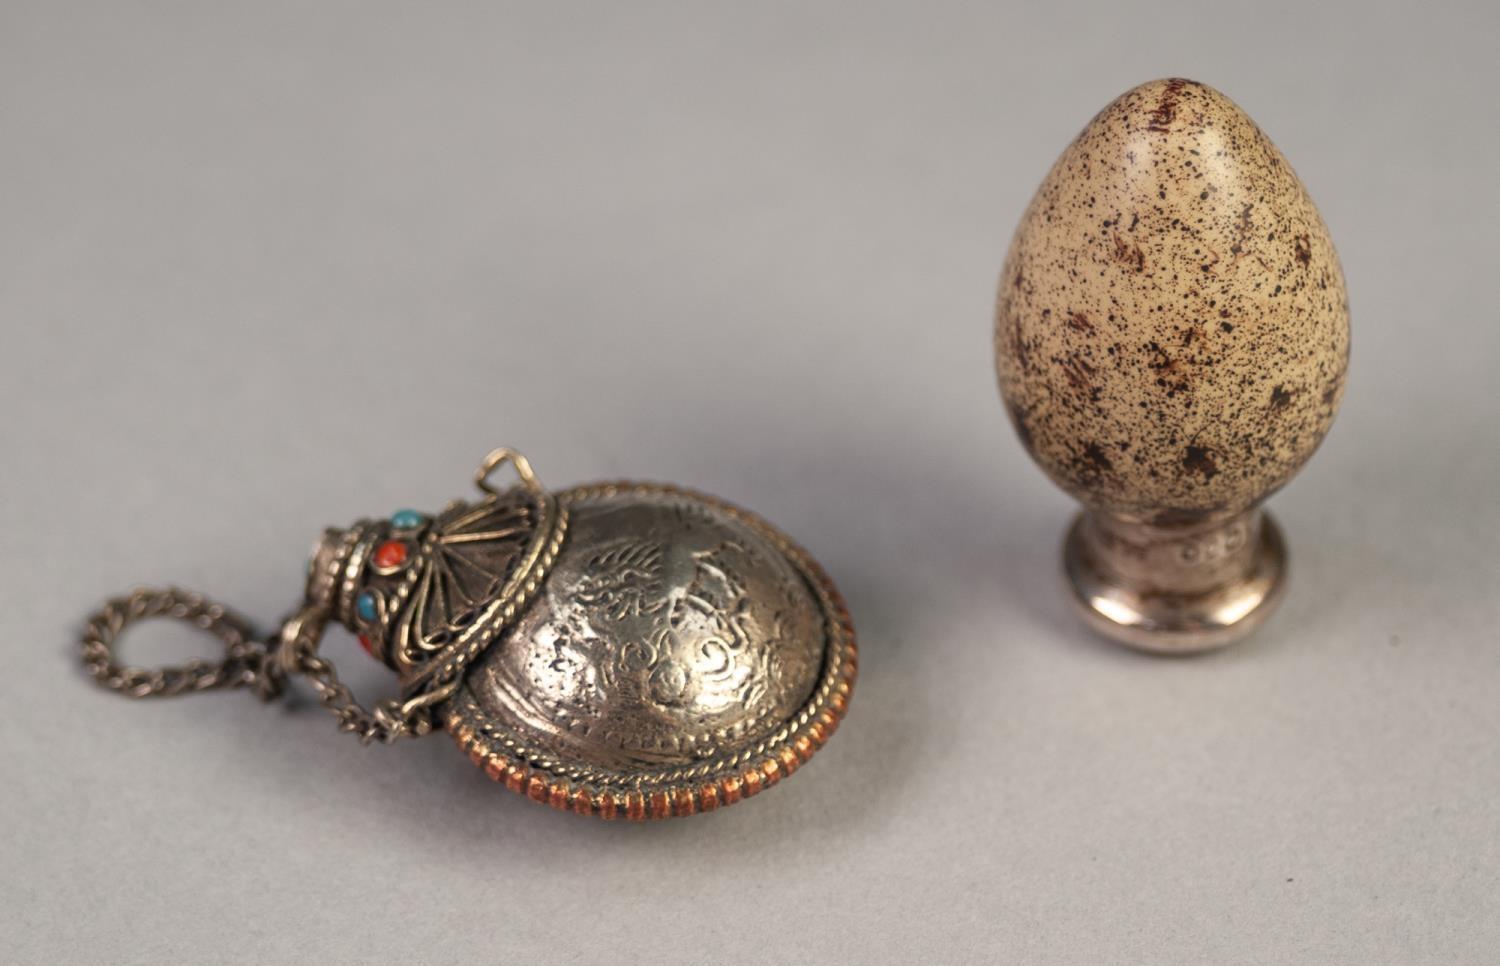 SMALL MOTTLED BROWN PAINTED PORCELAIN SIMULATED BIRDS EGG SCENT BOTTLE with hallmarked silver